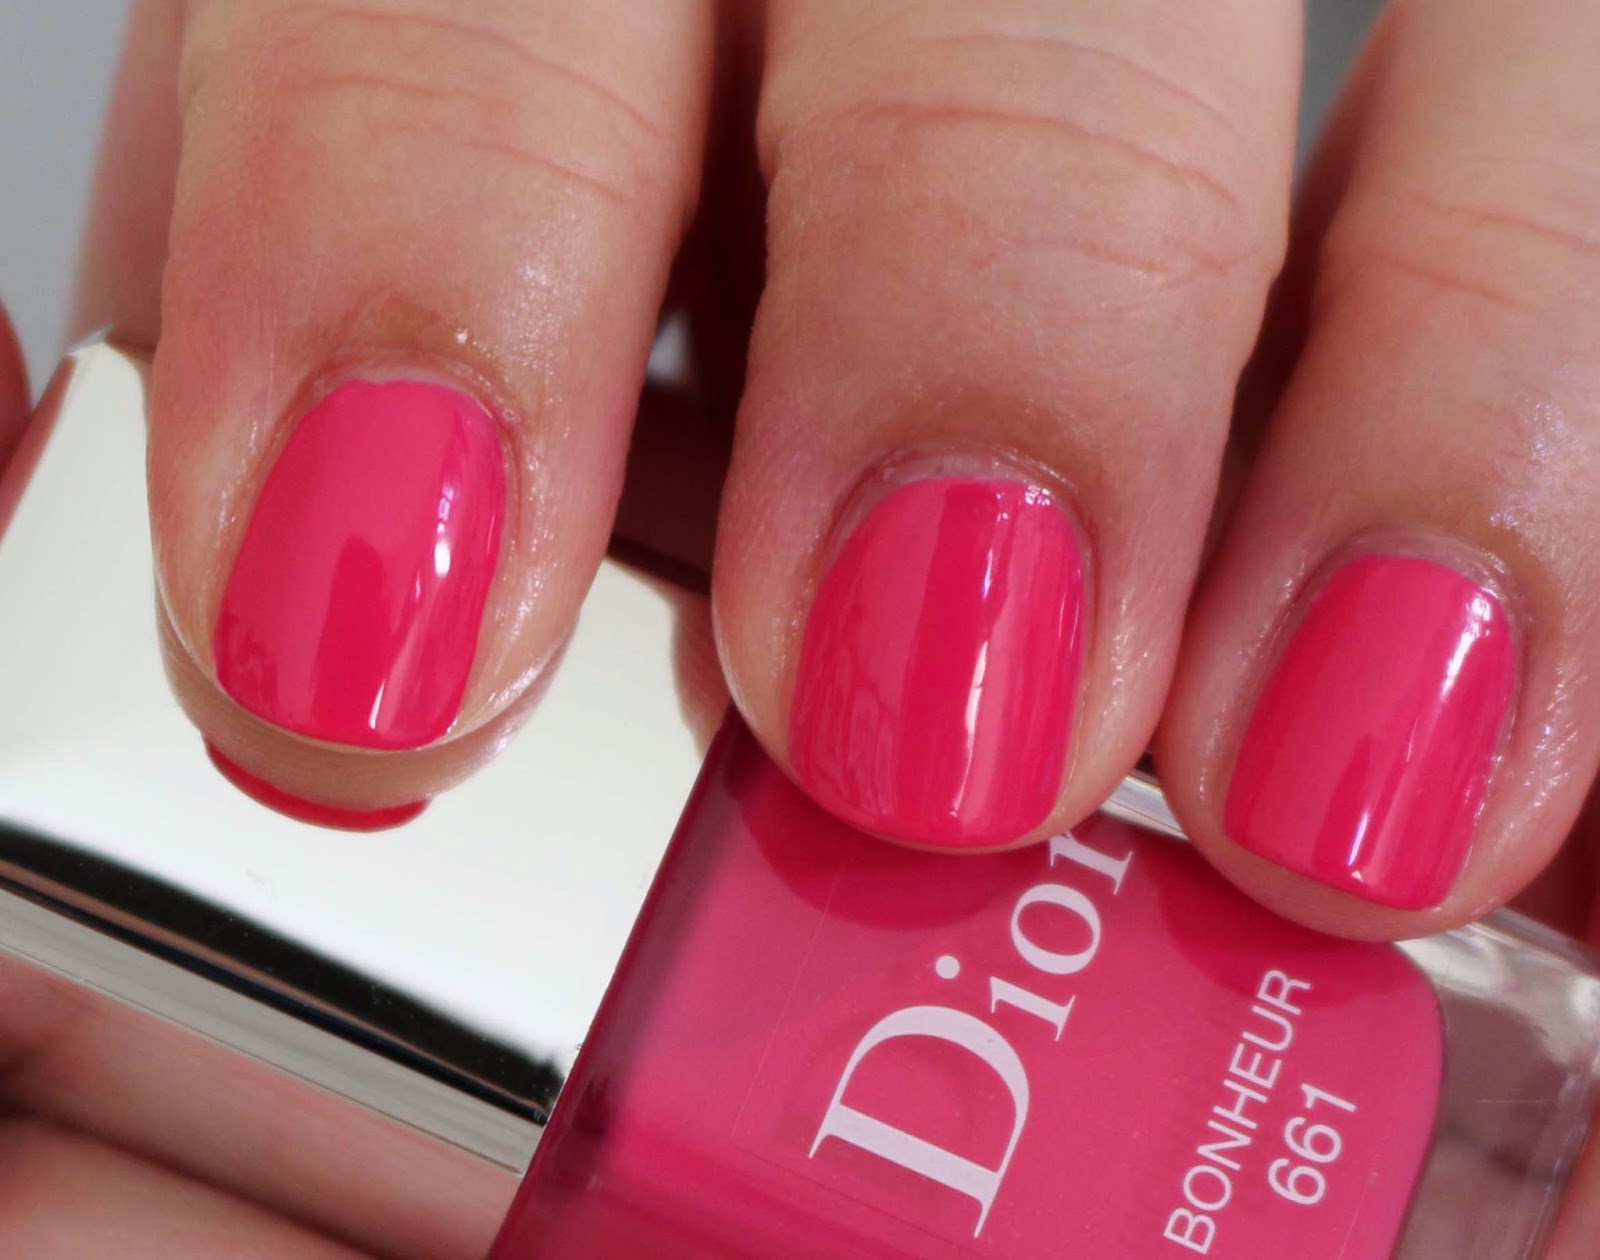 5. Dior Vernis Gel Shine and Long Wear Nail Lacquer - wide 9